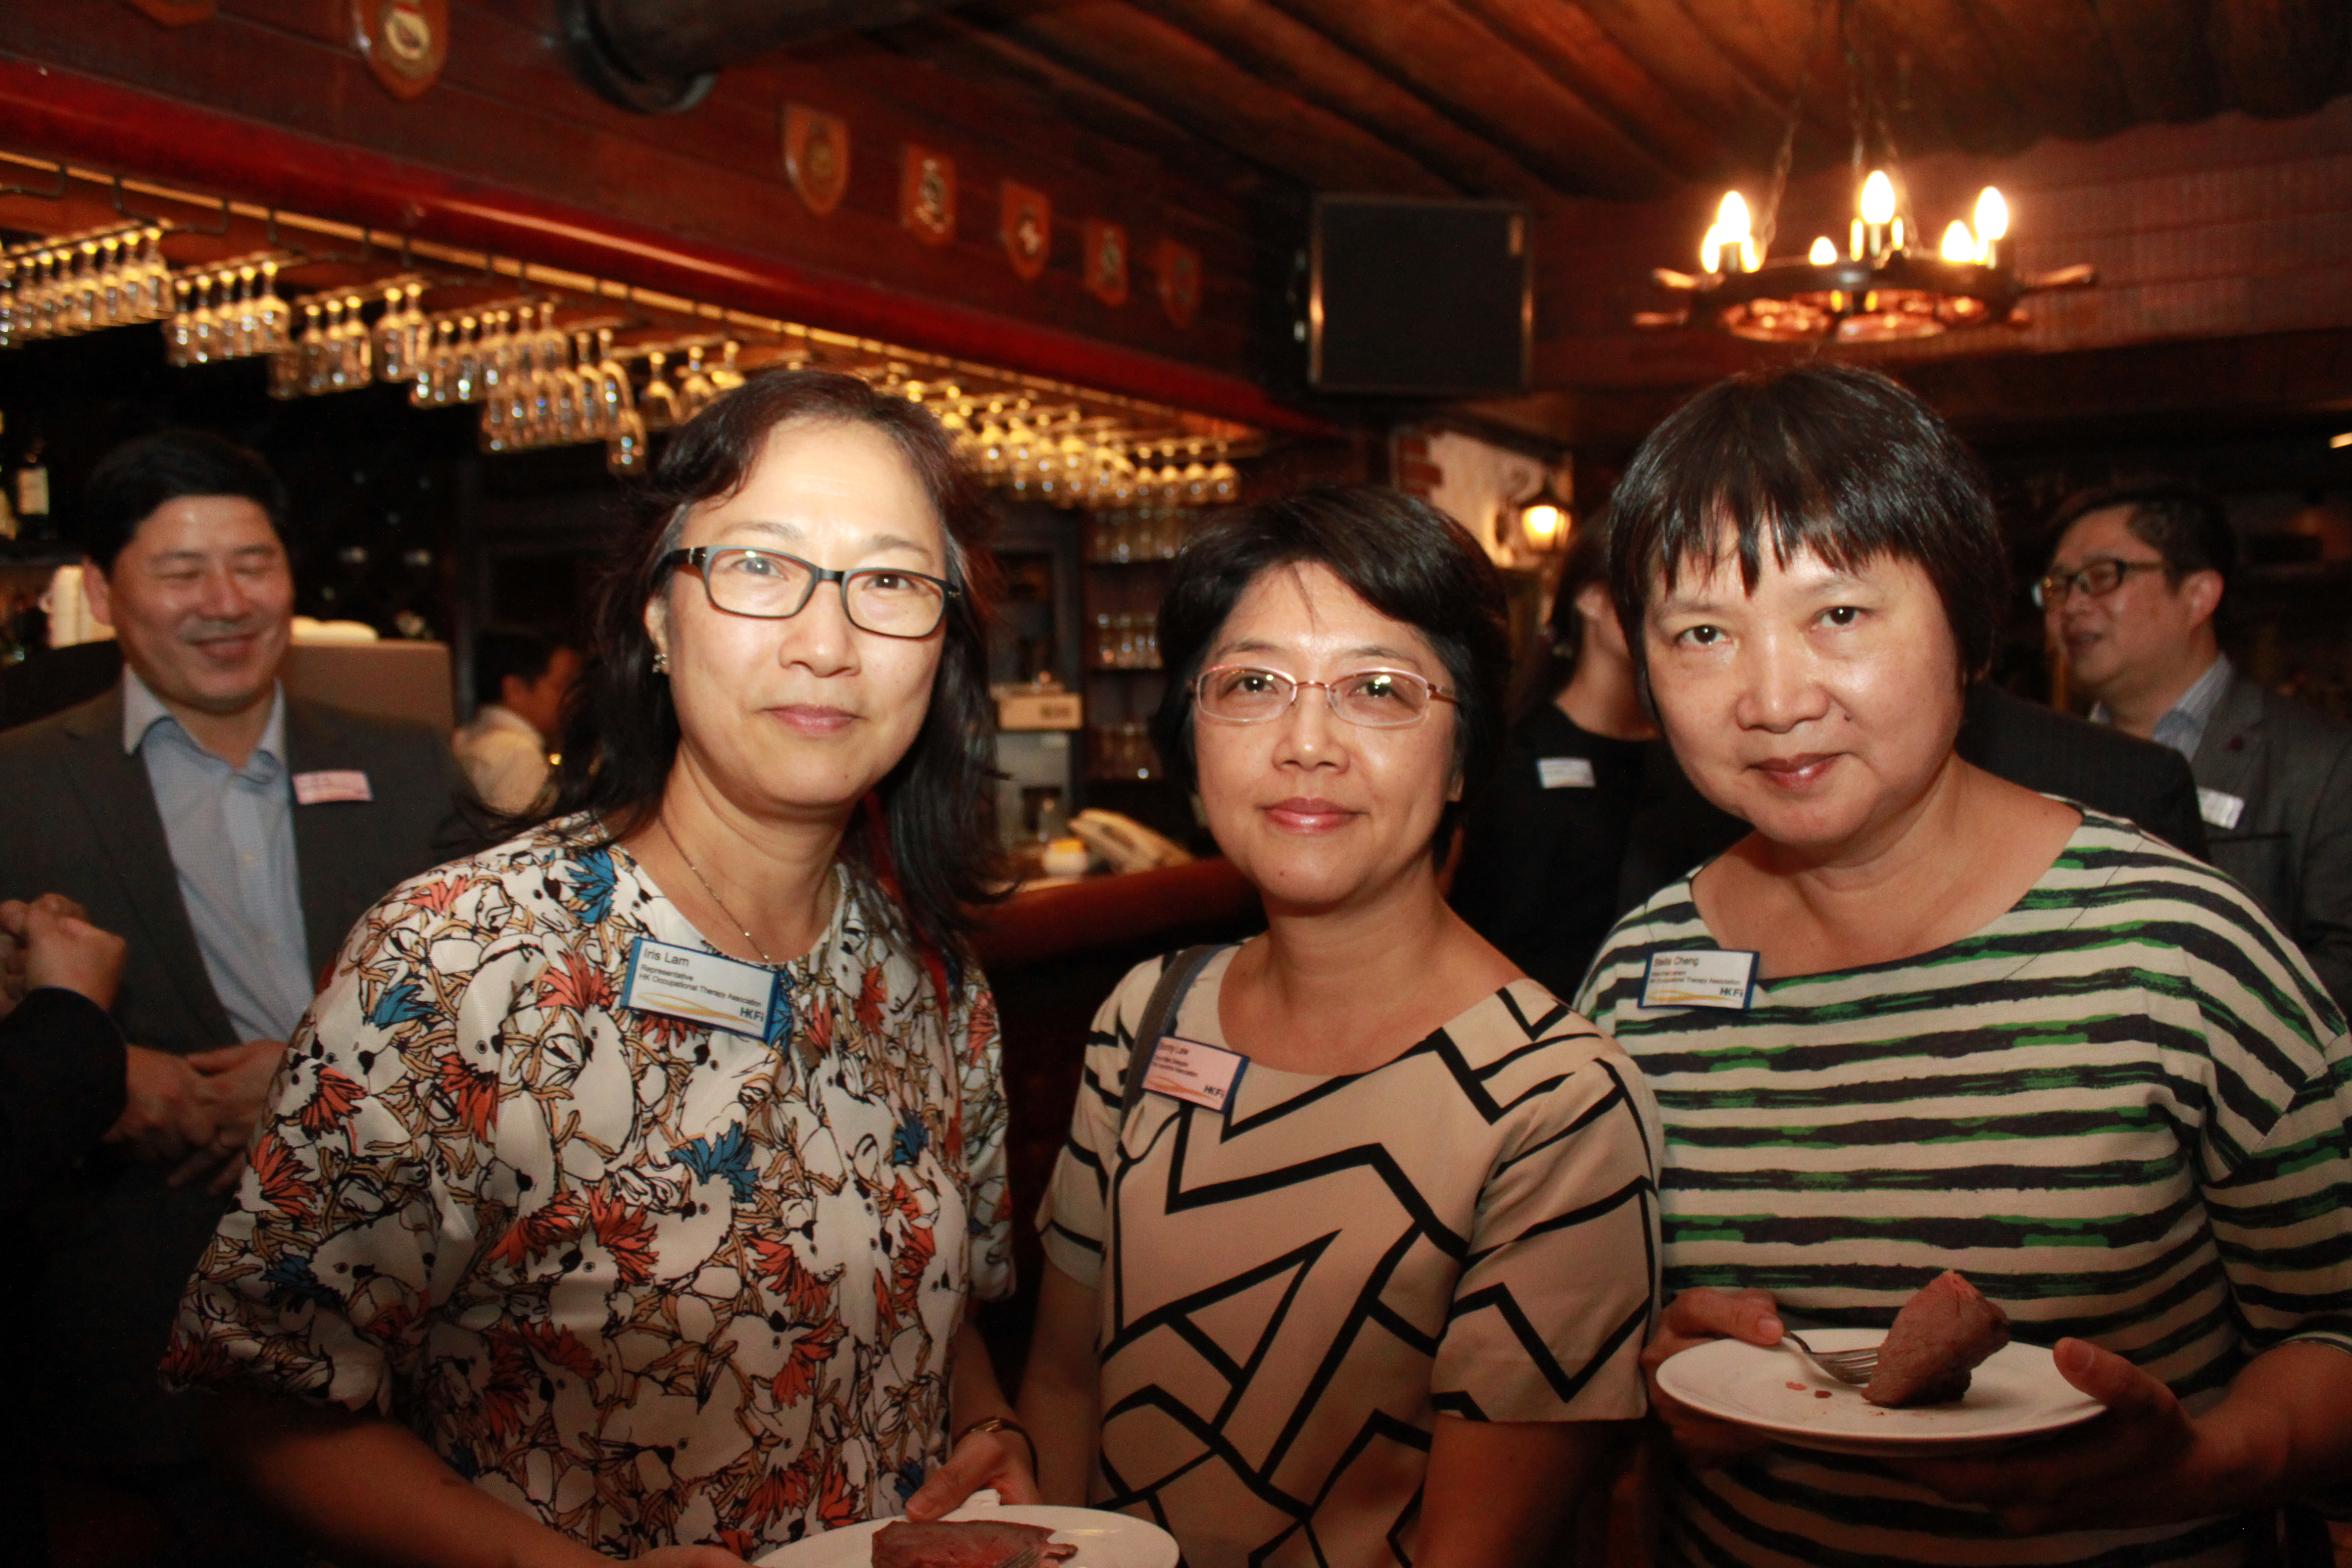 Technical Associations’ drink party with the relevant government officials and trade bodies